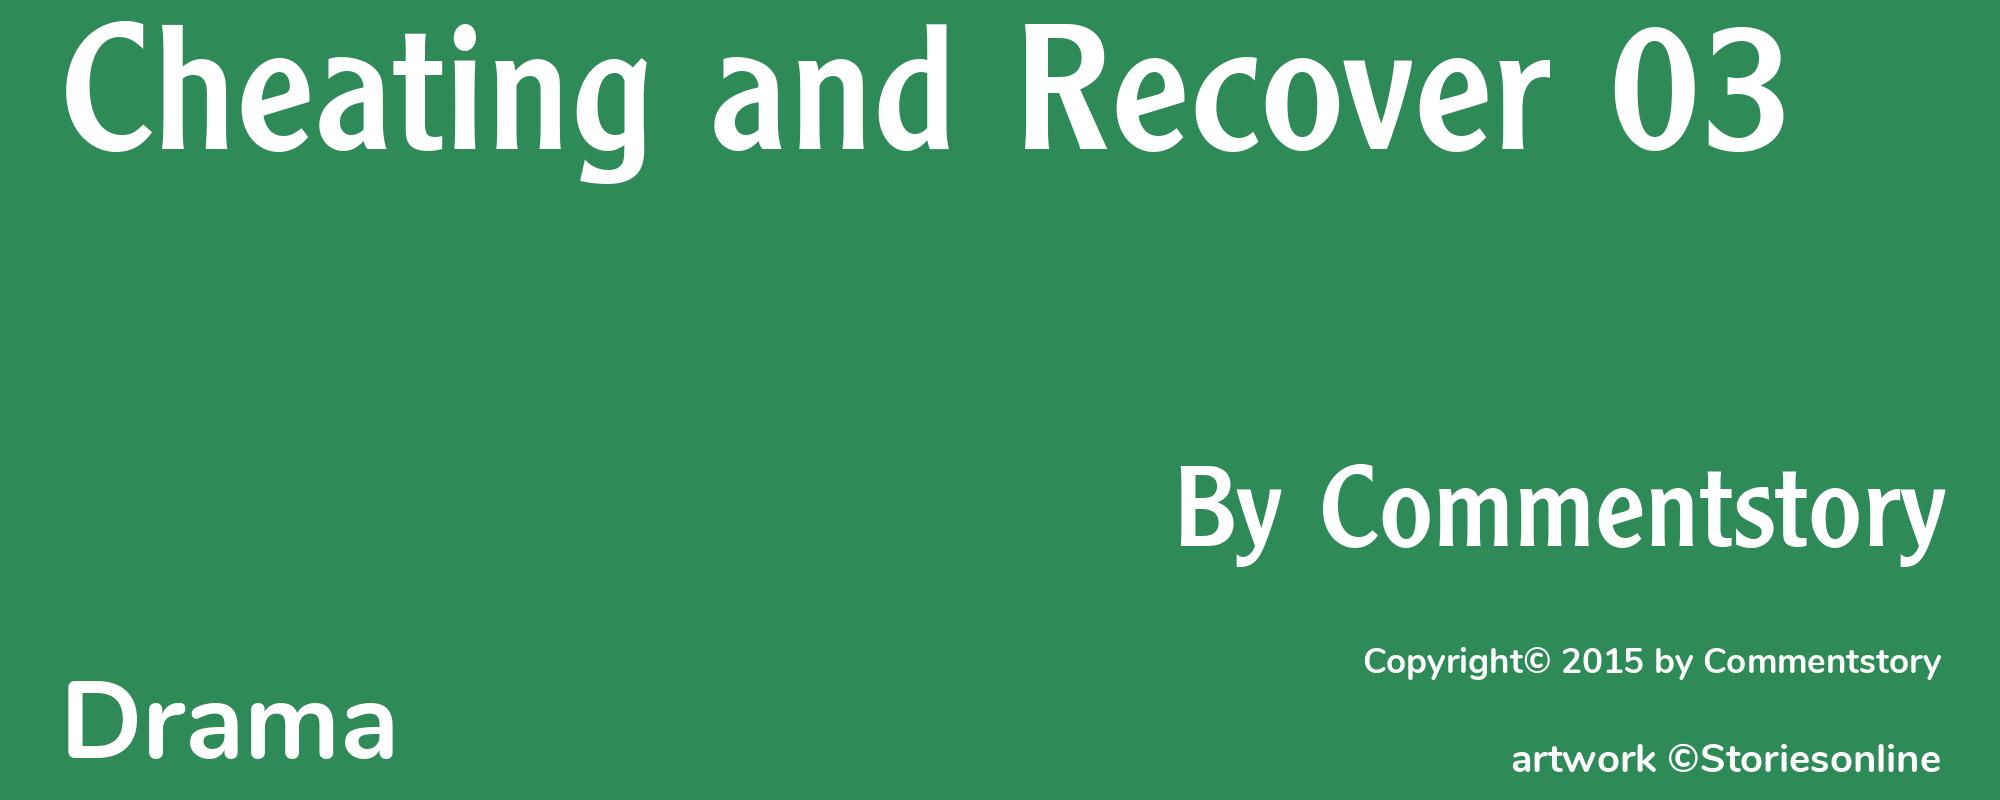 Cheating and Recover 03 - Cover